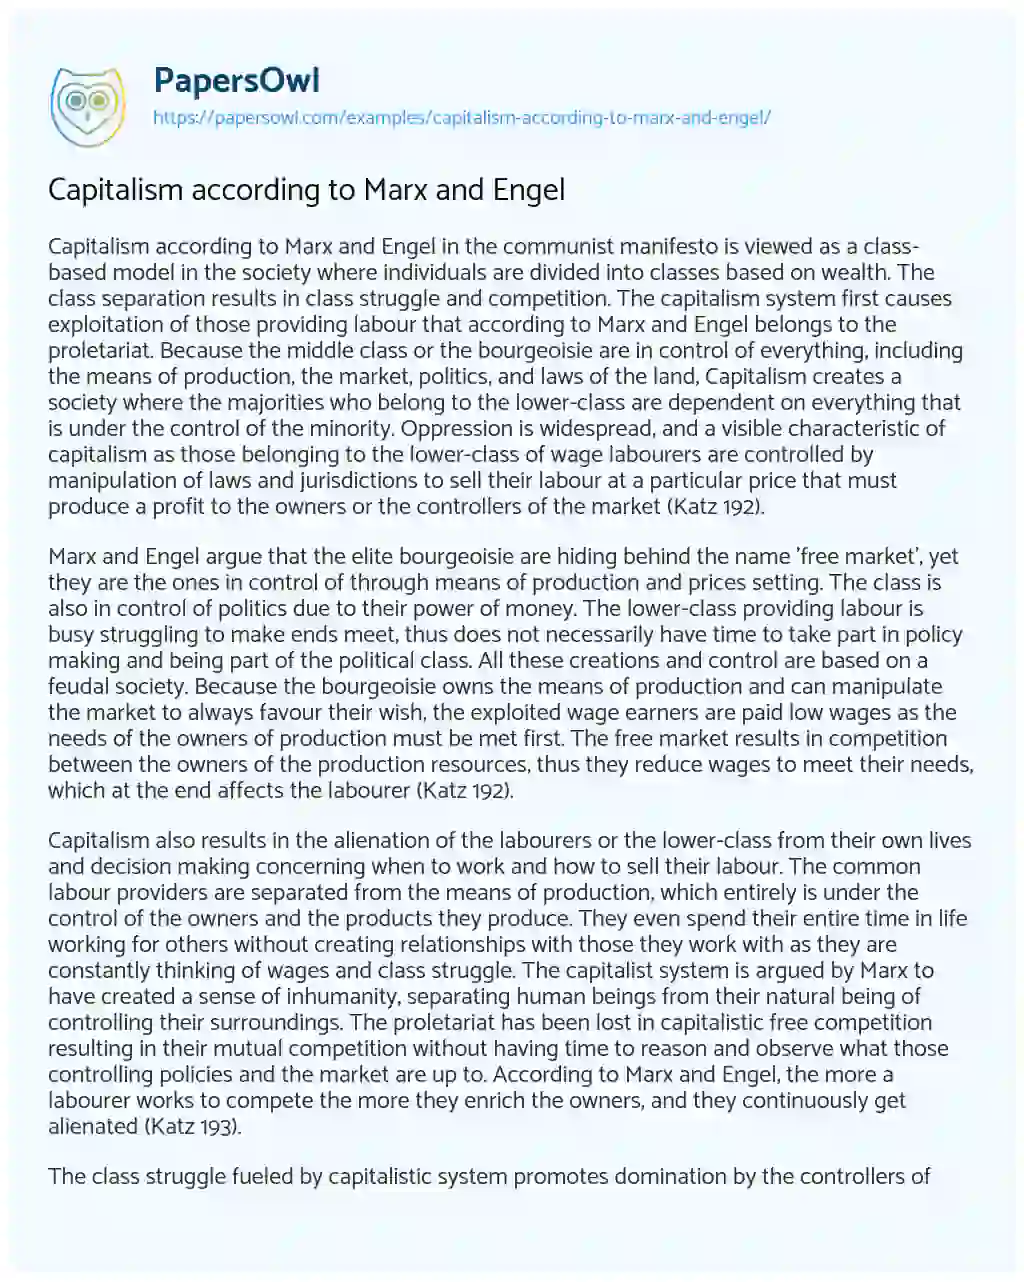 Essay on Capitalism According to Marx and Engel